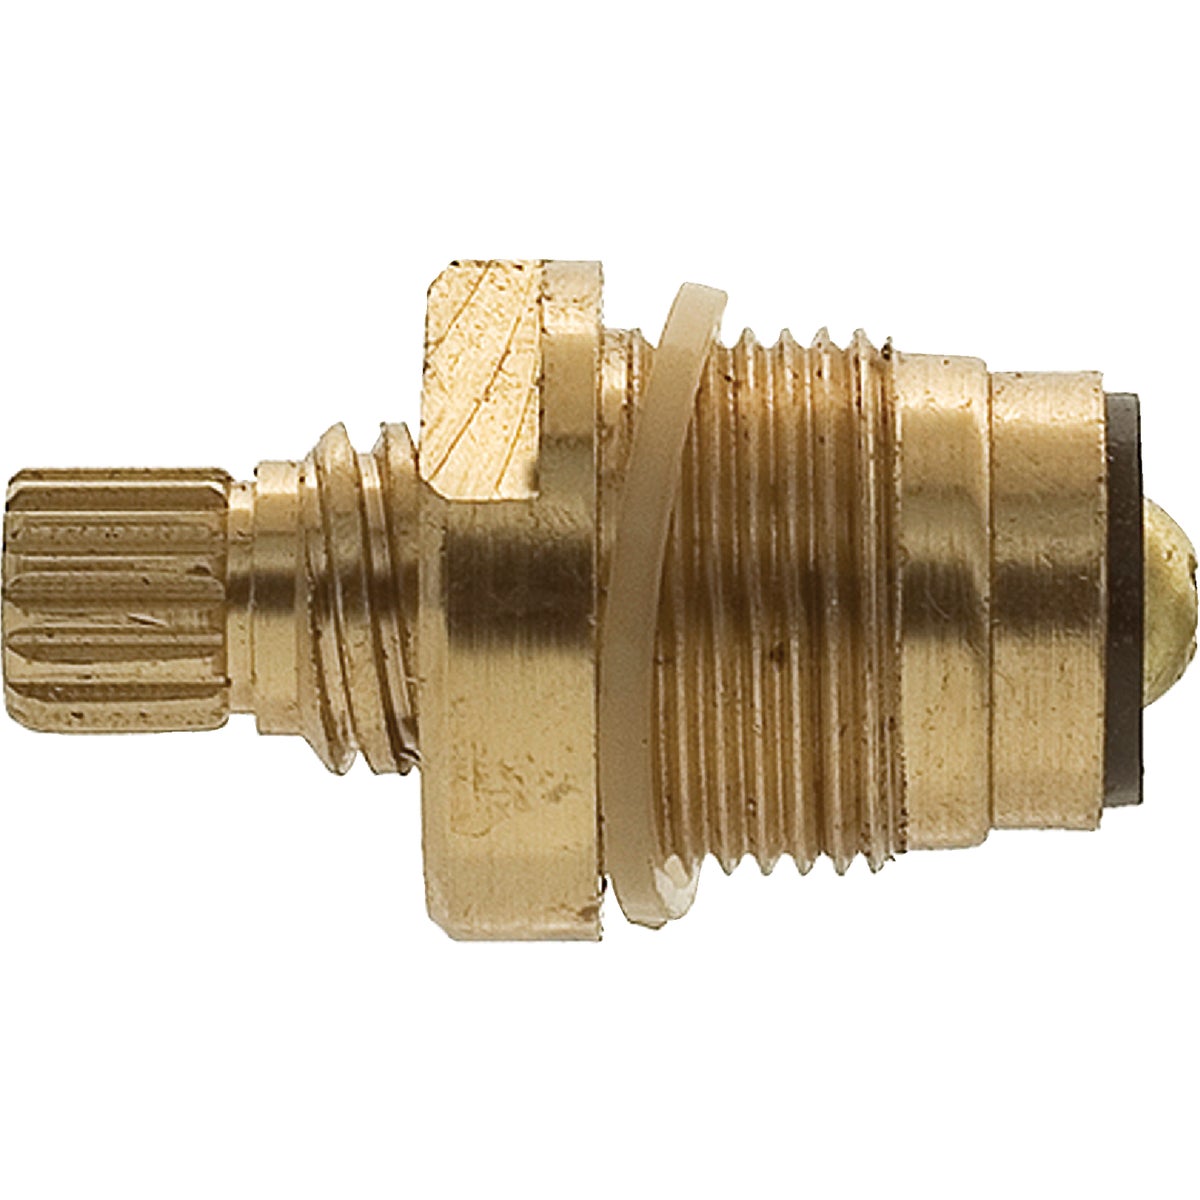 Item 400158, Replacement faucet stem for Central Brass sink, lavatory, or laundry.